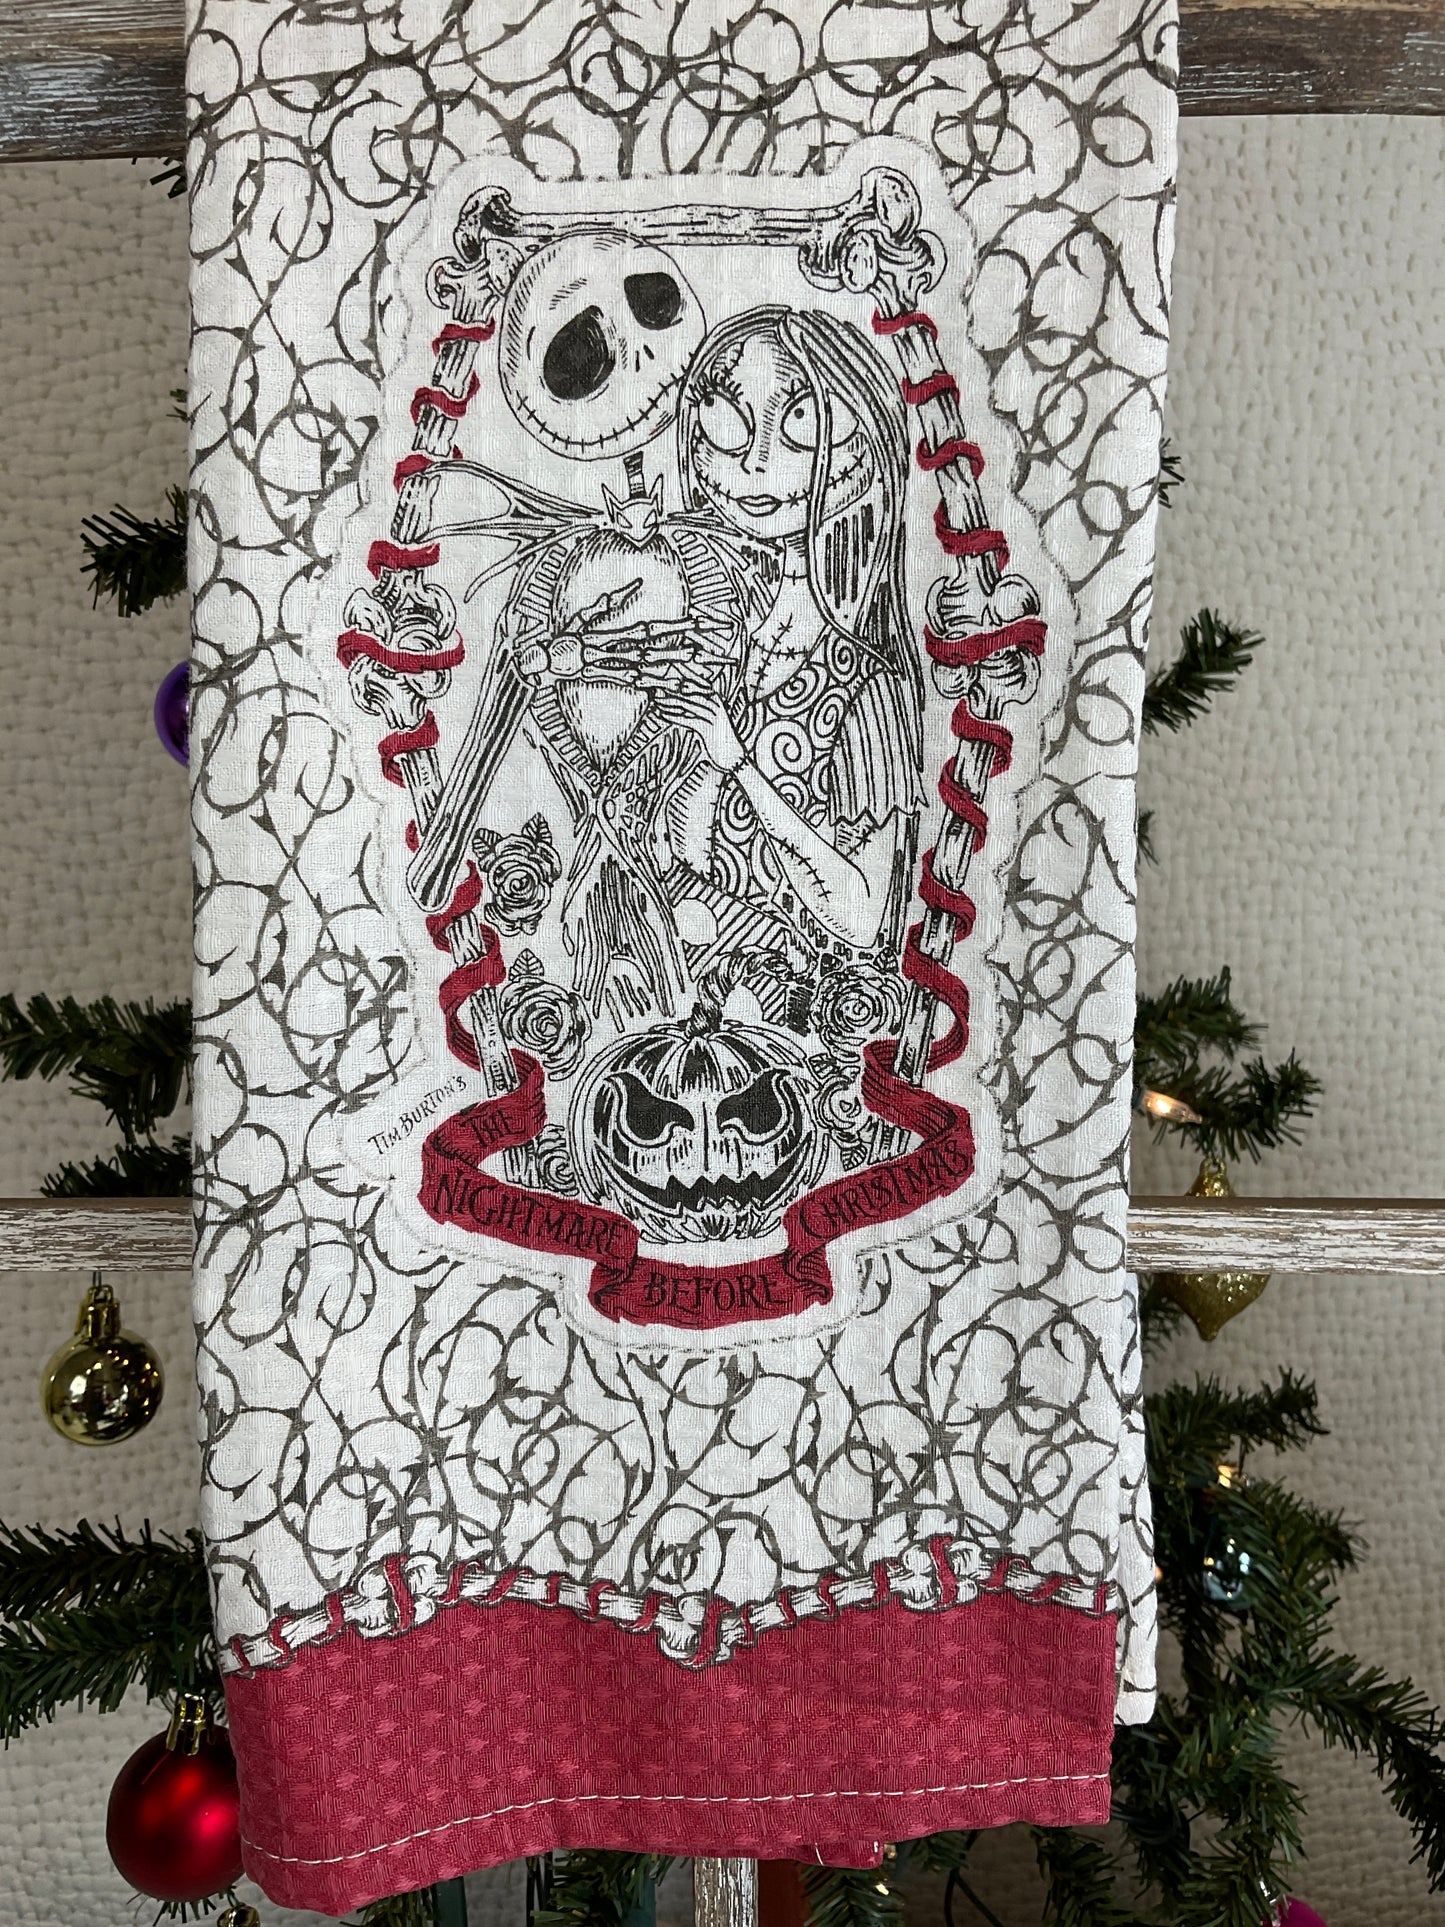 Disney's Nightmare Before Christmas Kitchen Towels, Sold Separately